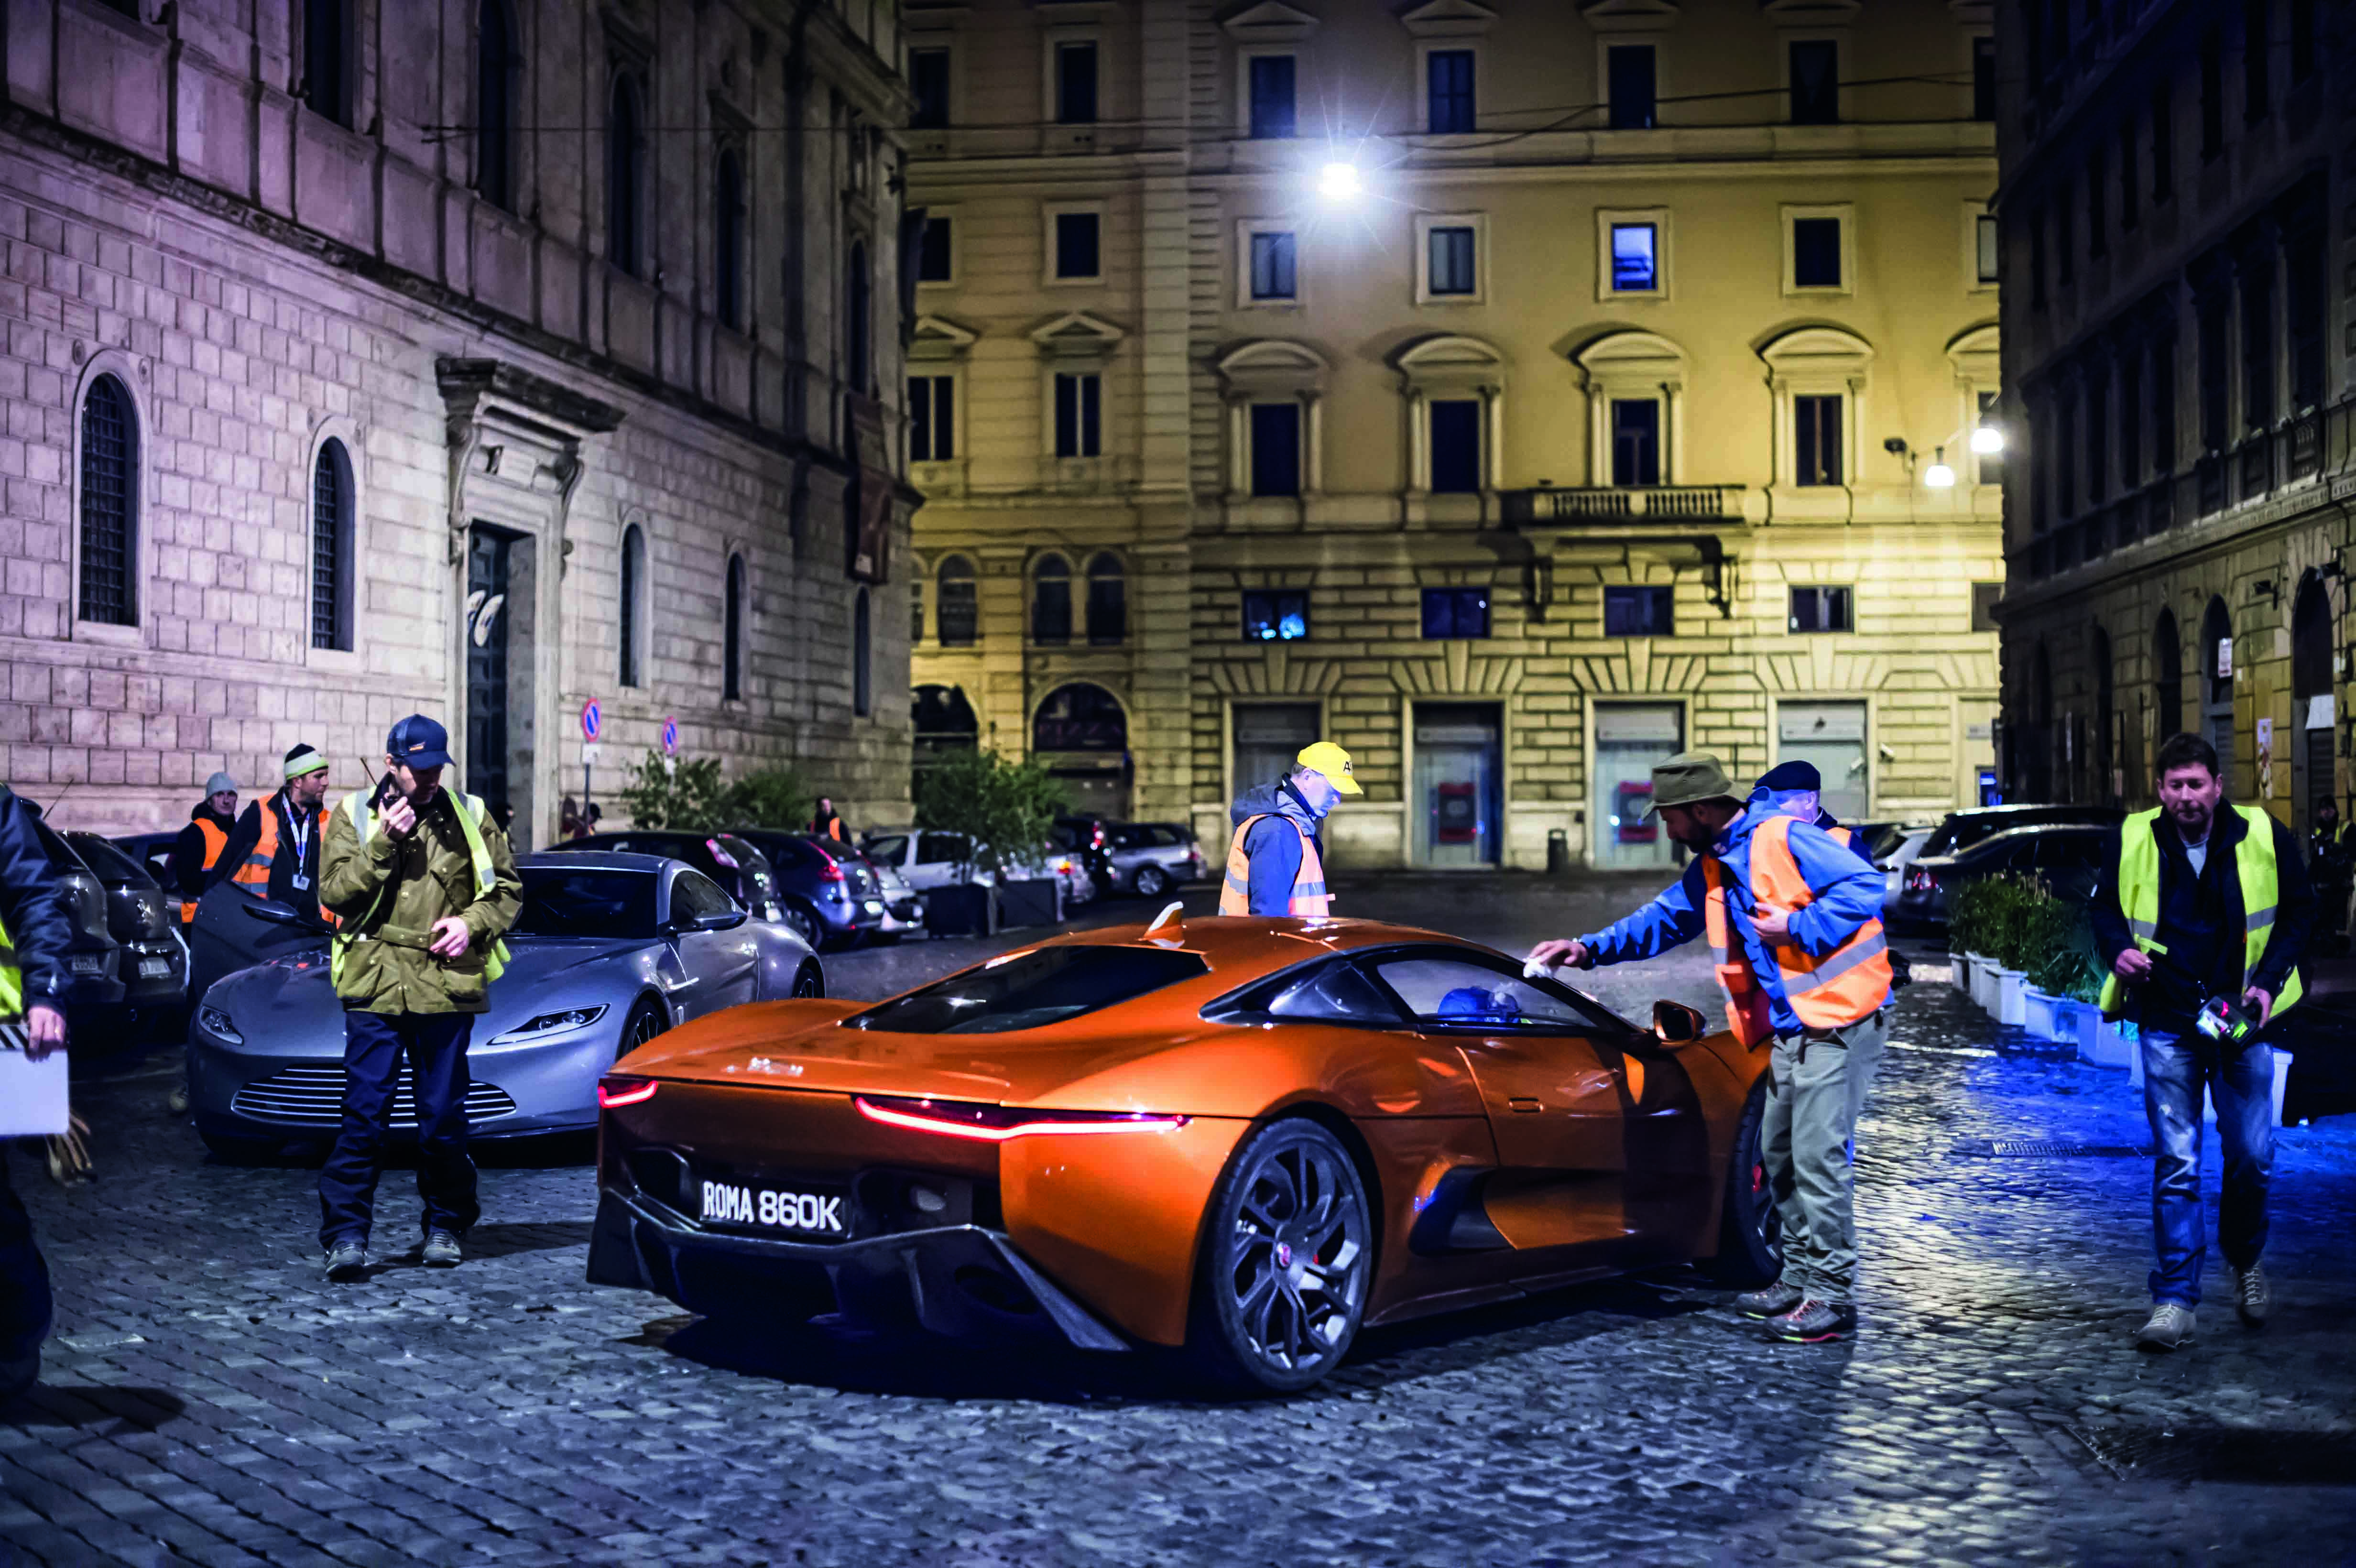 Hinx's Jaguar, Bond's Aston and the action vehicle team on the Corso Vittorio in Rome